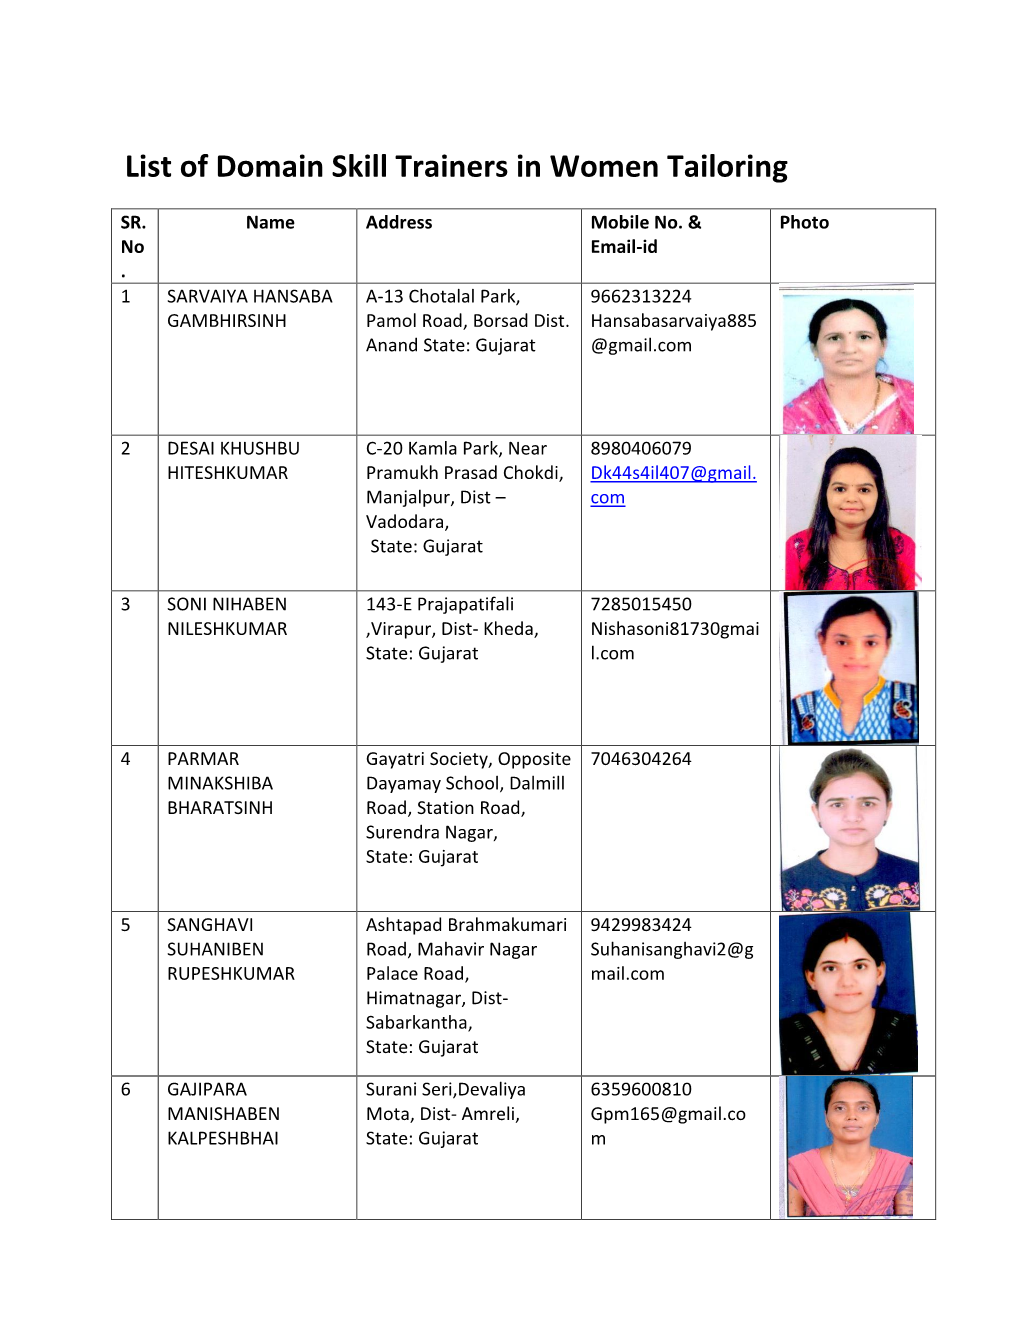 List of Domain Skill Trainers in Women Tailoring